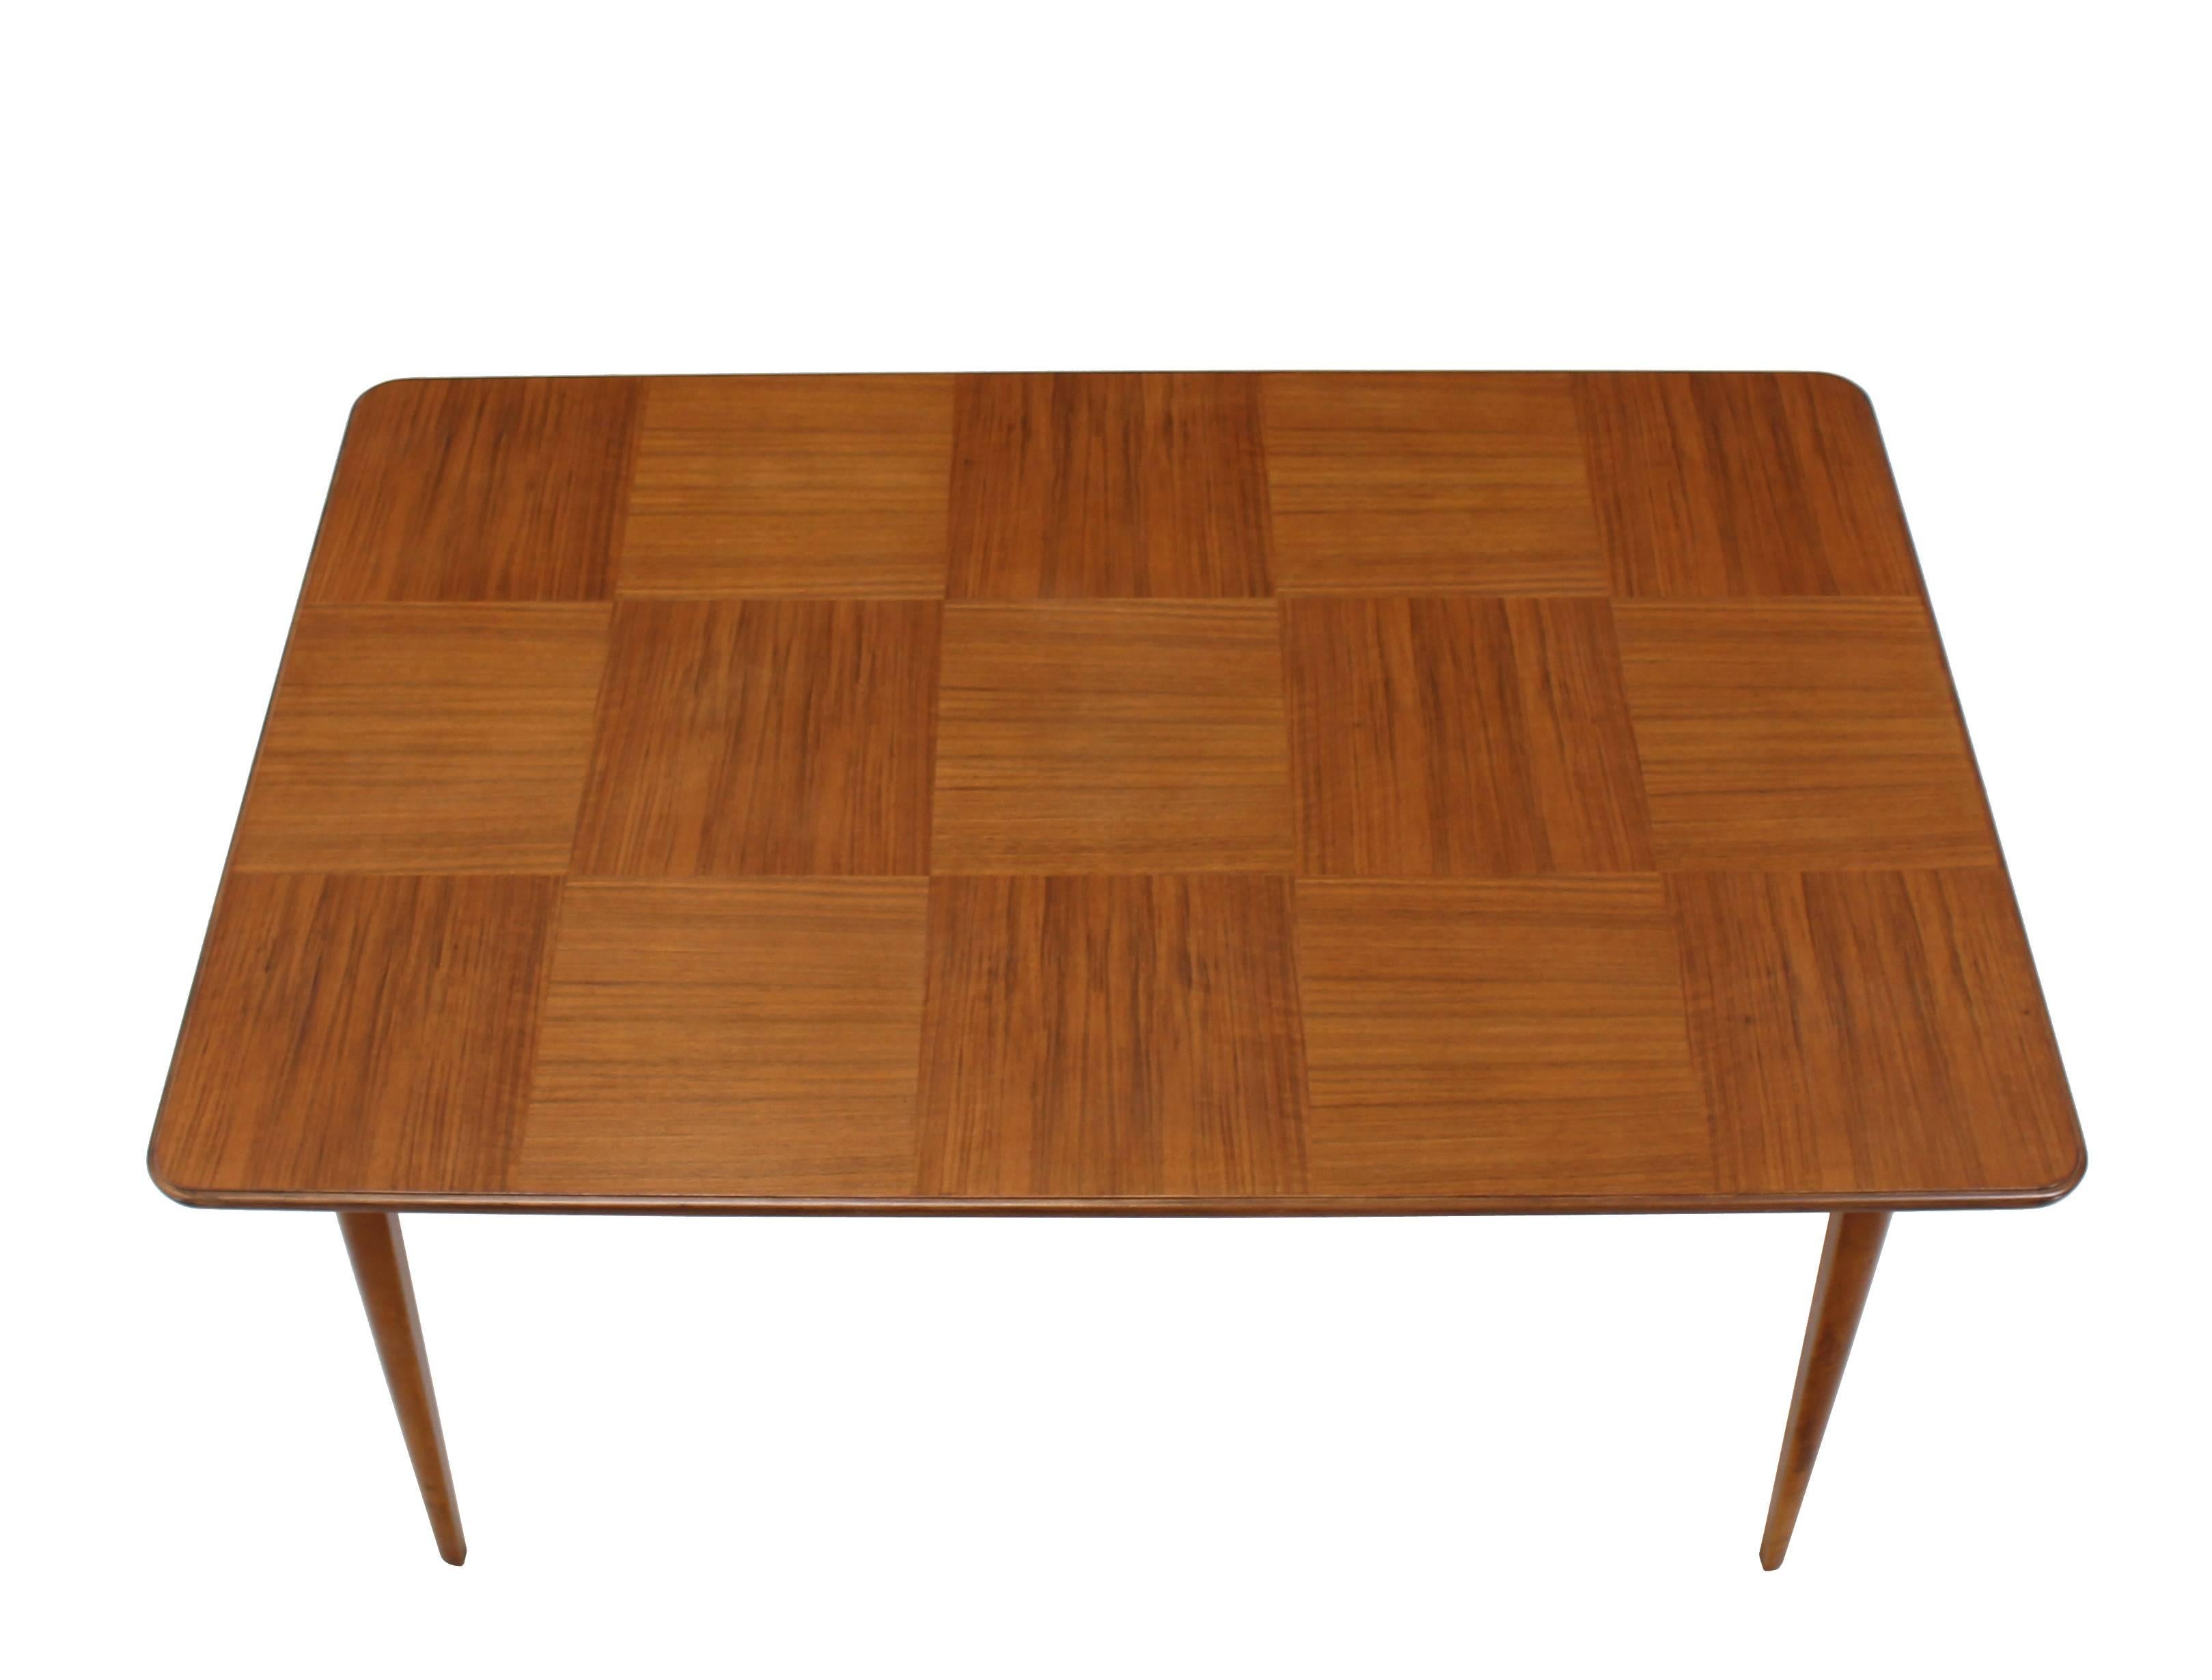 American Rare Edmund Spence Checker Pattern Dining Table For Sale